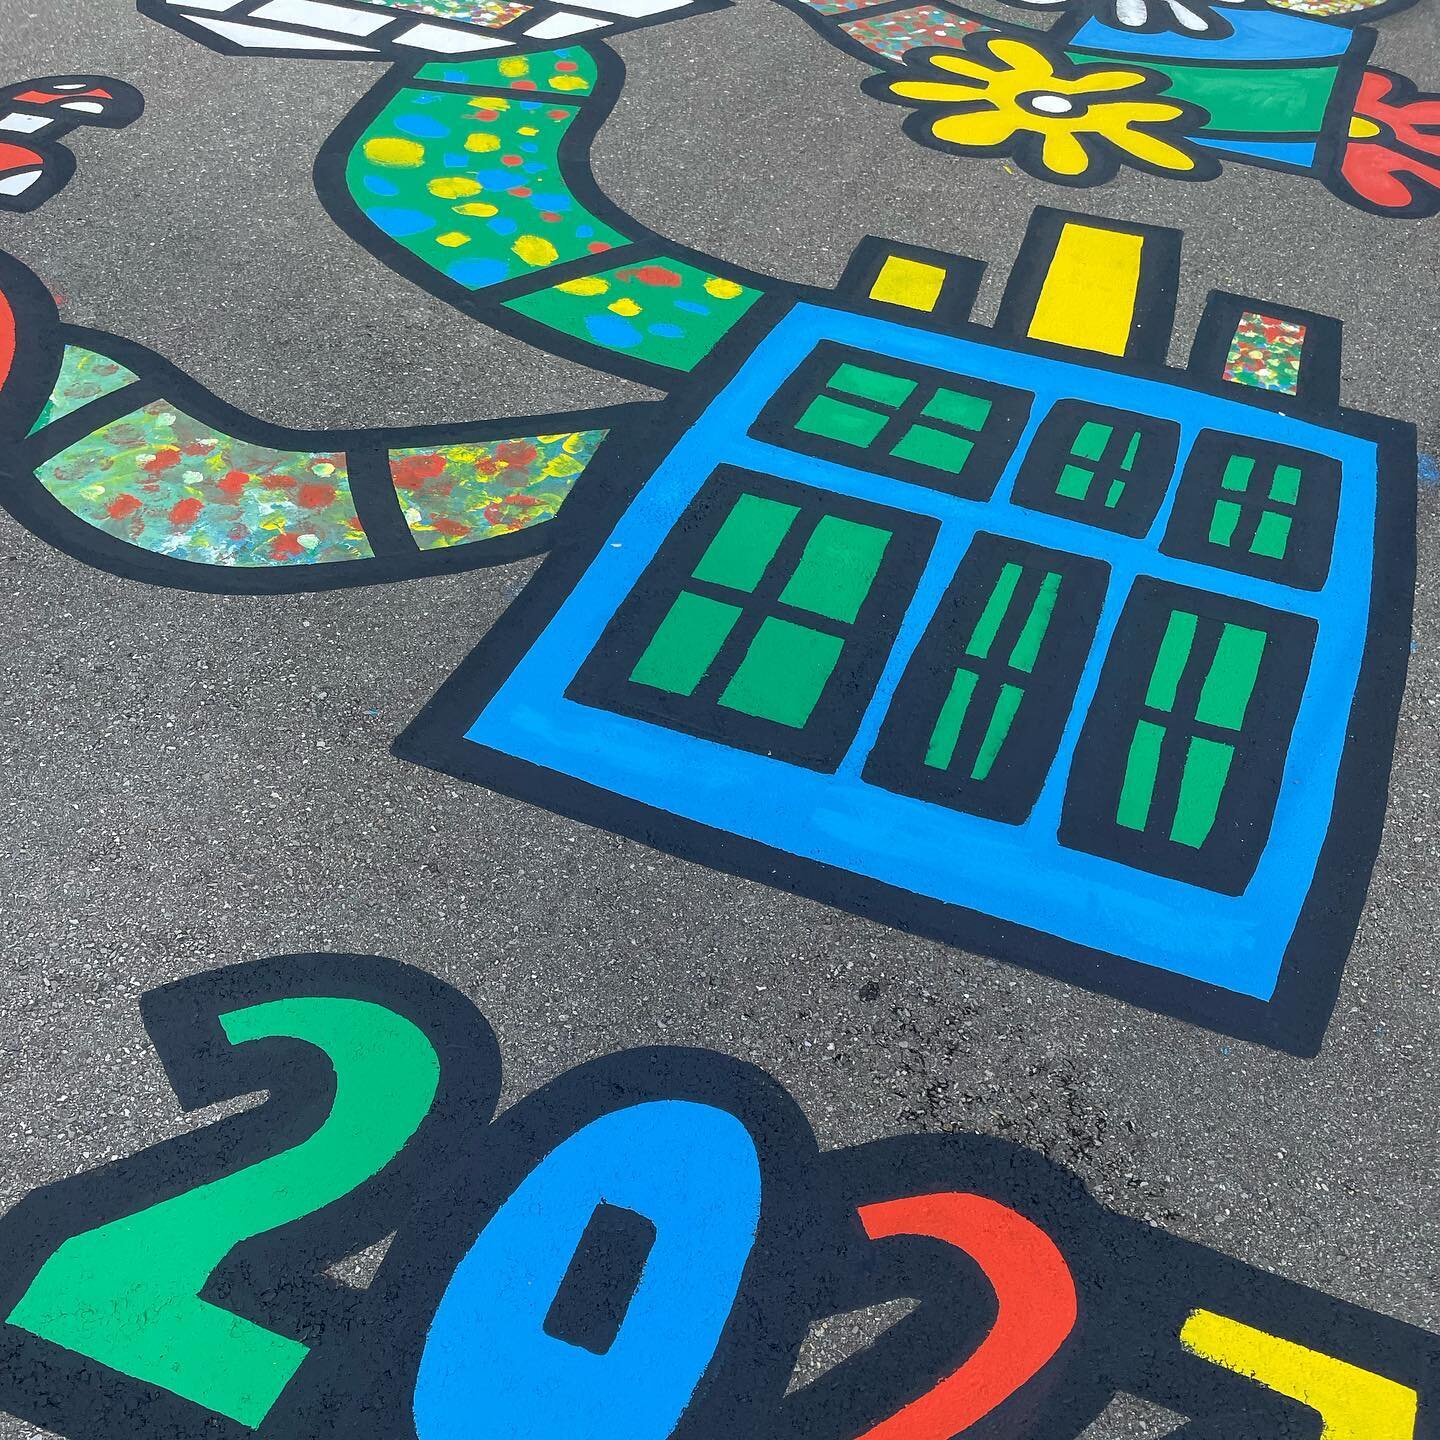 ✨floor mural &ldquo;Traumfabrik&rdquo; painted together with the kids of the elementary school @primarstufezollikofen✨1) the kids drew their own &ldquo;dream factory&rdquo; 2) I&rsquo;ve created a sketch out of the most liked ones by the kids 3) we p